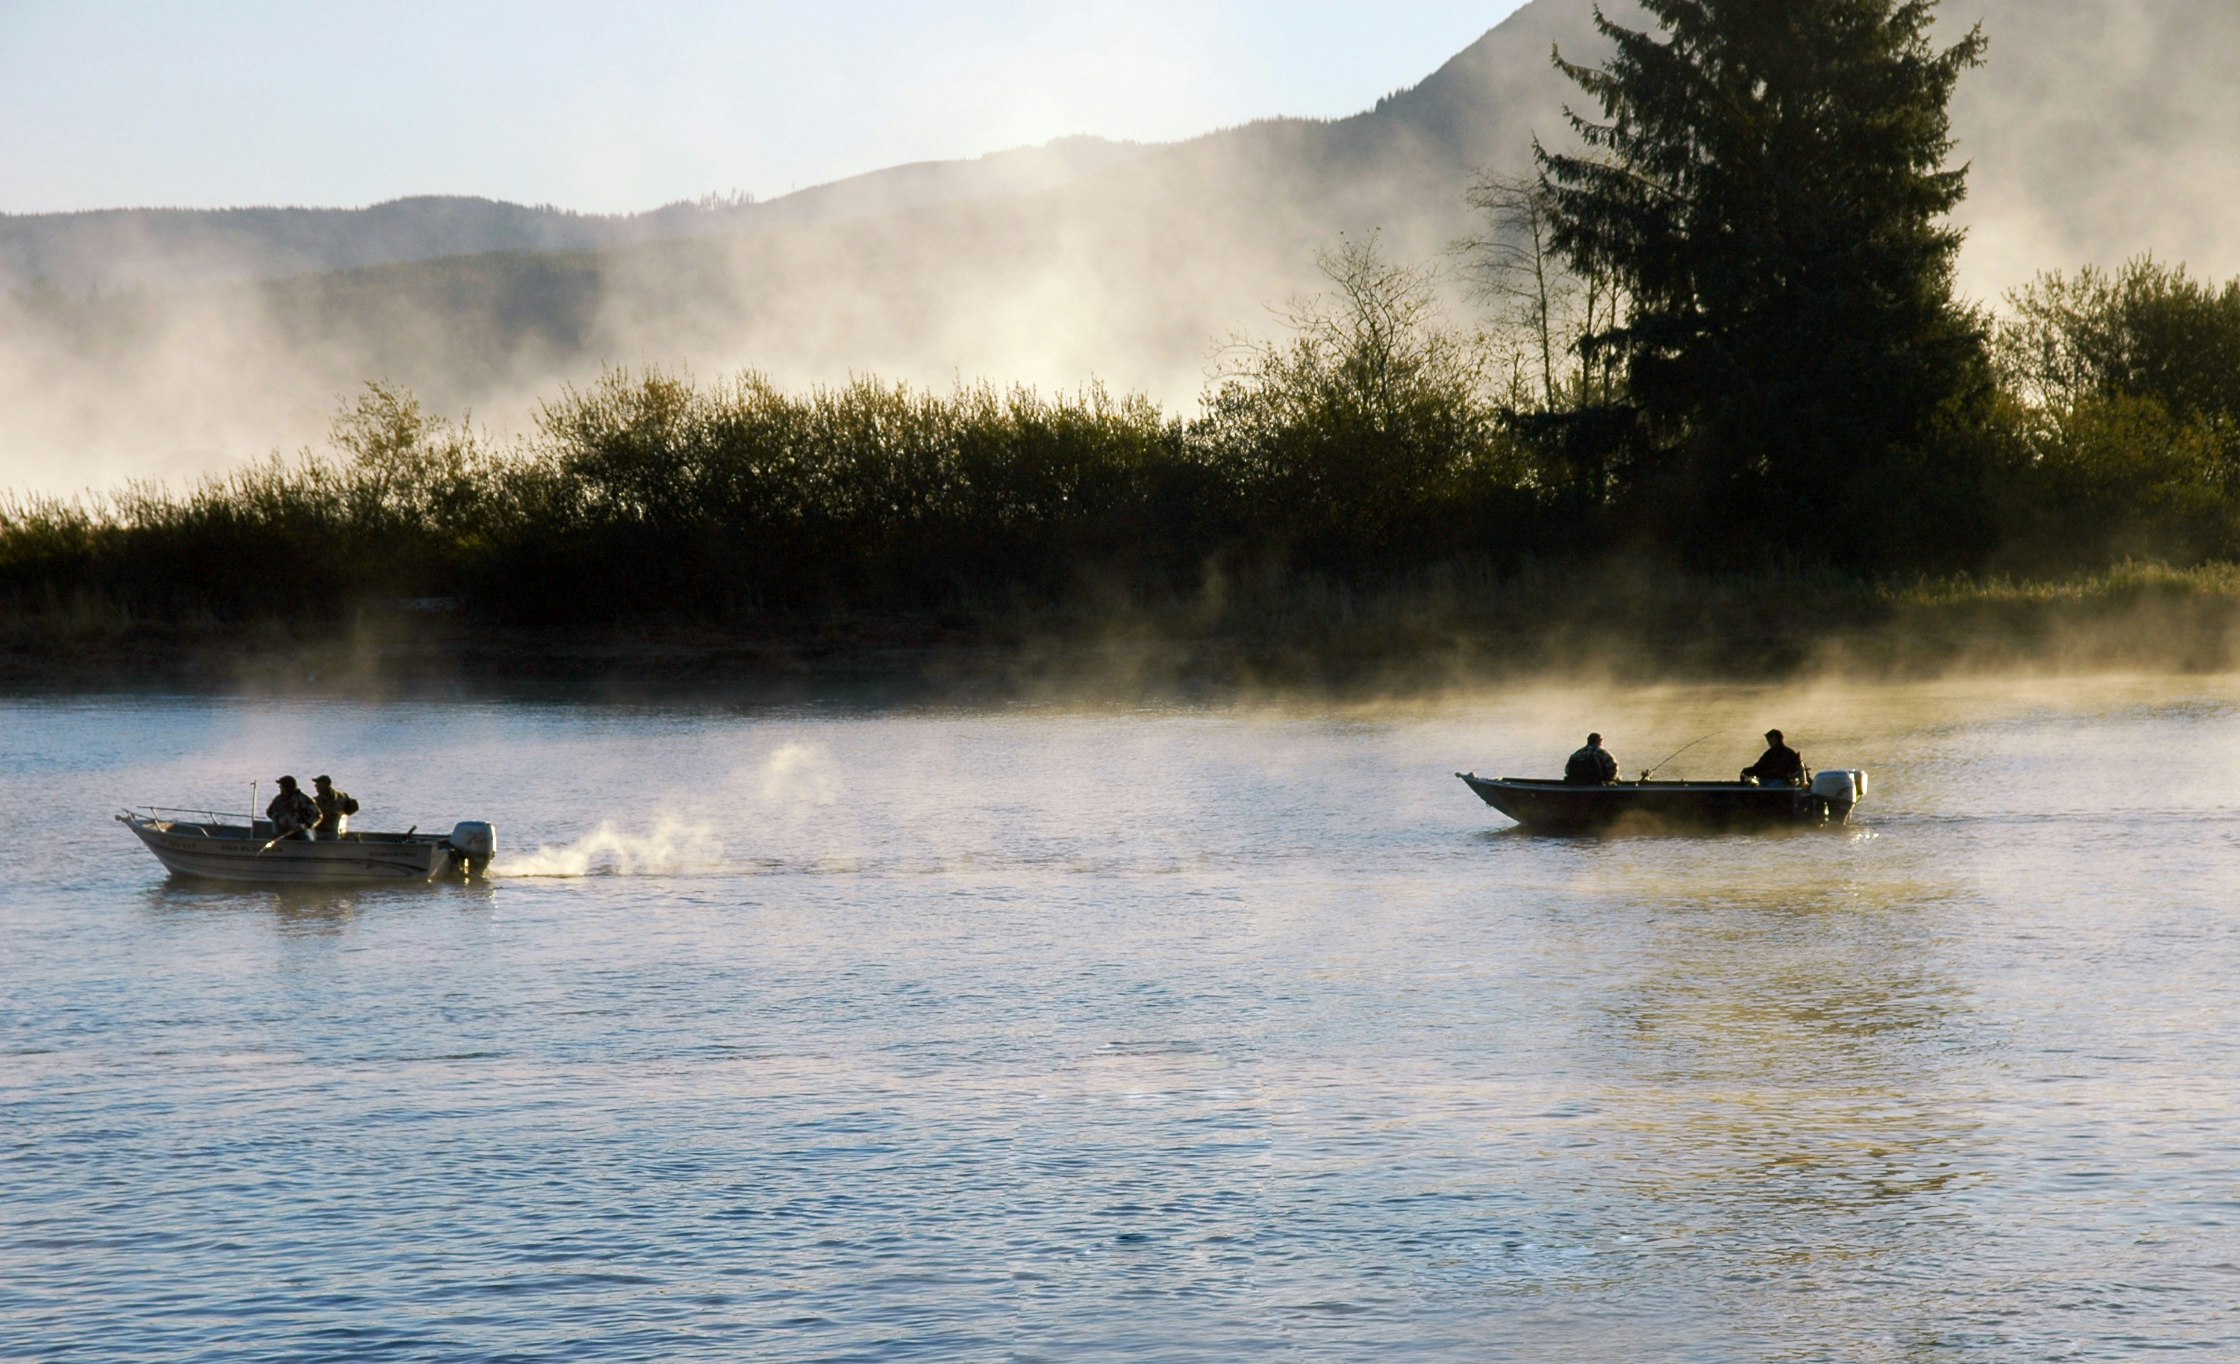 Two pairs of fishermen, each in small flat-bottomed motorboats, perch on the misty Nehalem River in Oregon. The water is flat and blue, barely ruffled by the breeze. In the background, shrubs and one large evergreen tree form dramatic silhouettes against a plume of fog that just obscures the blue mountains in the distance. 